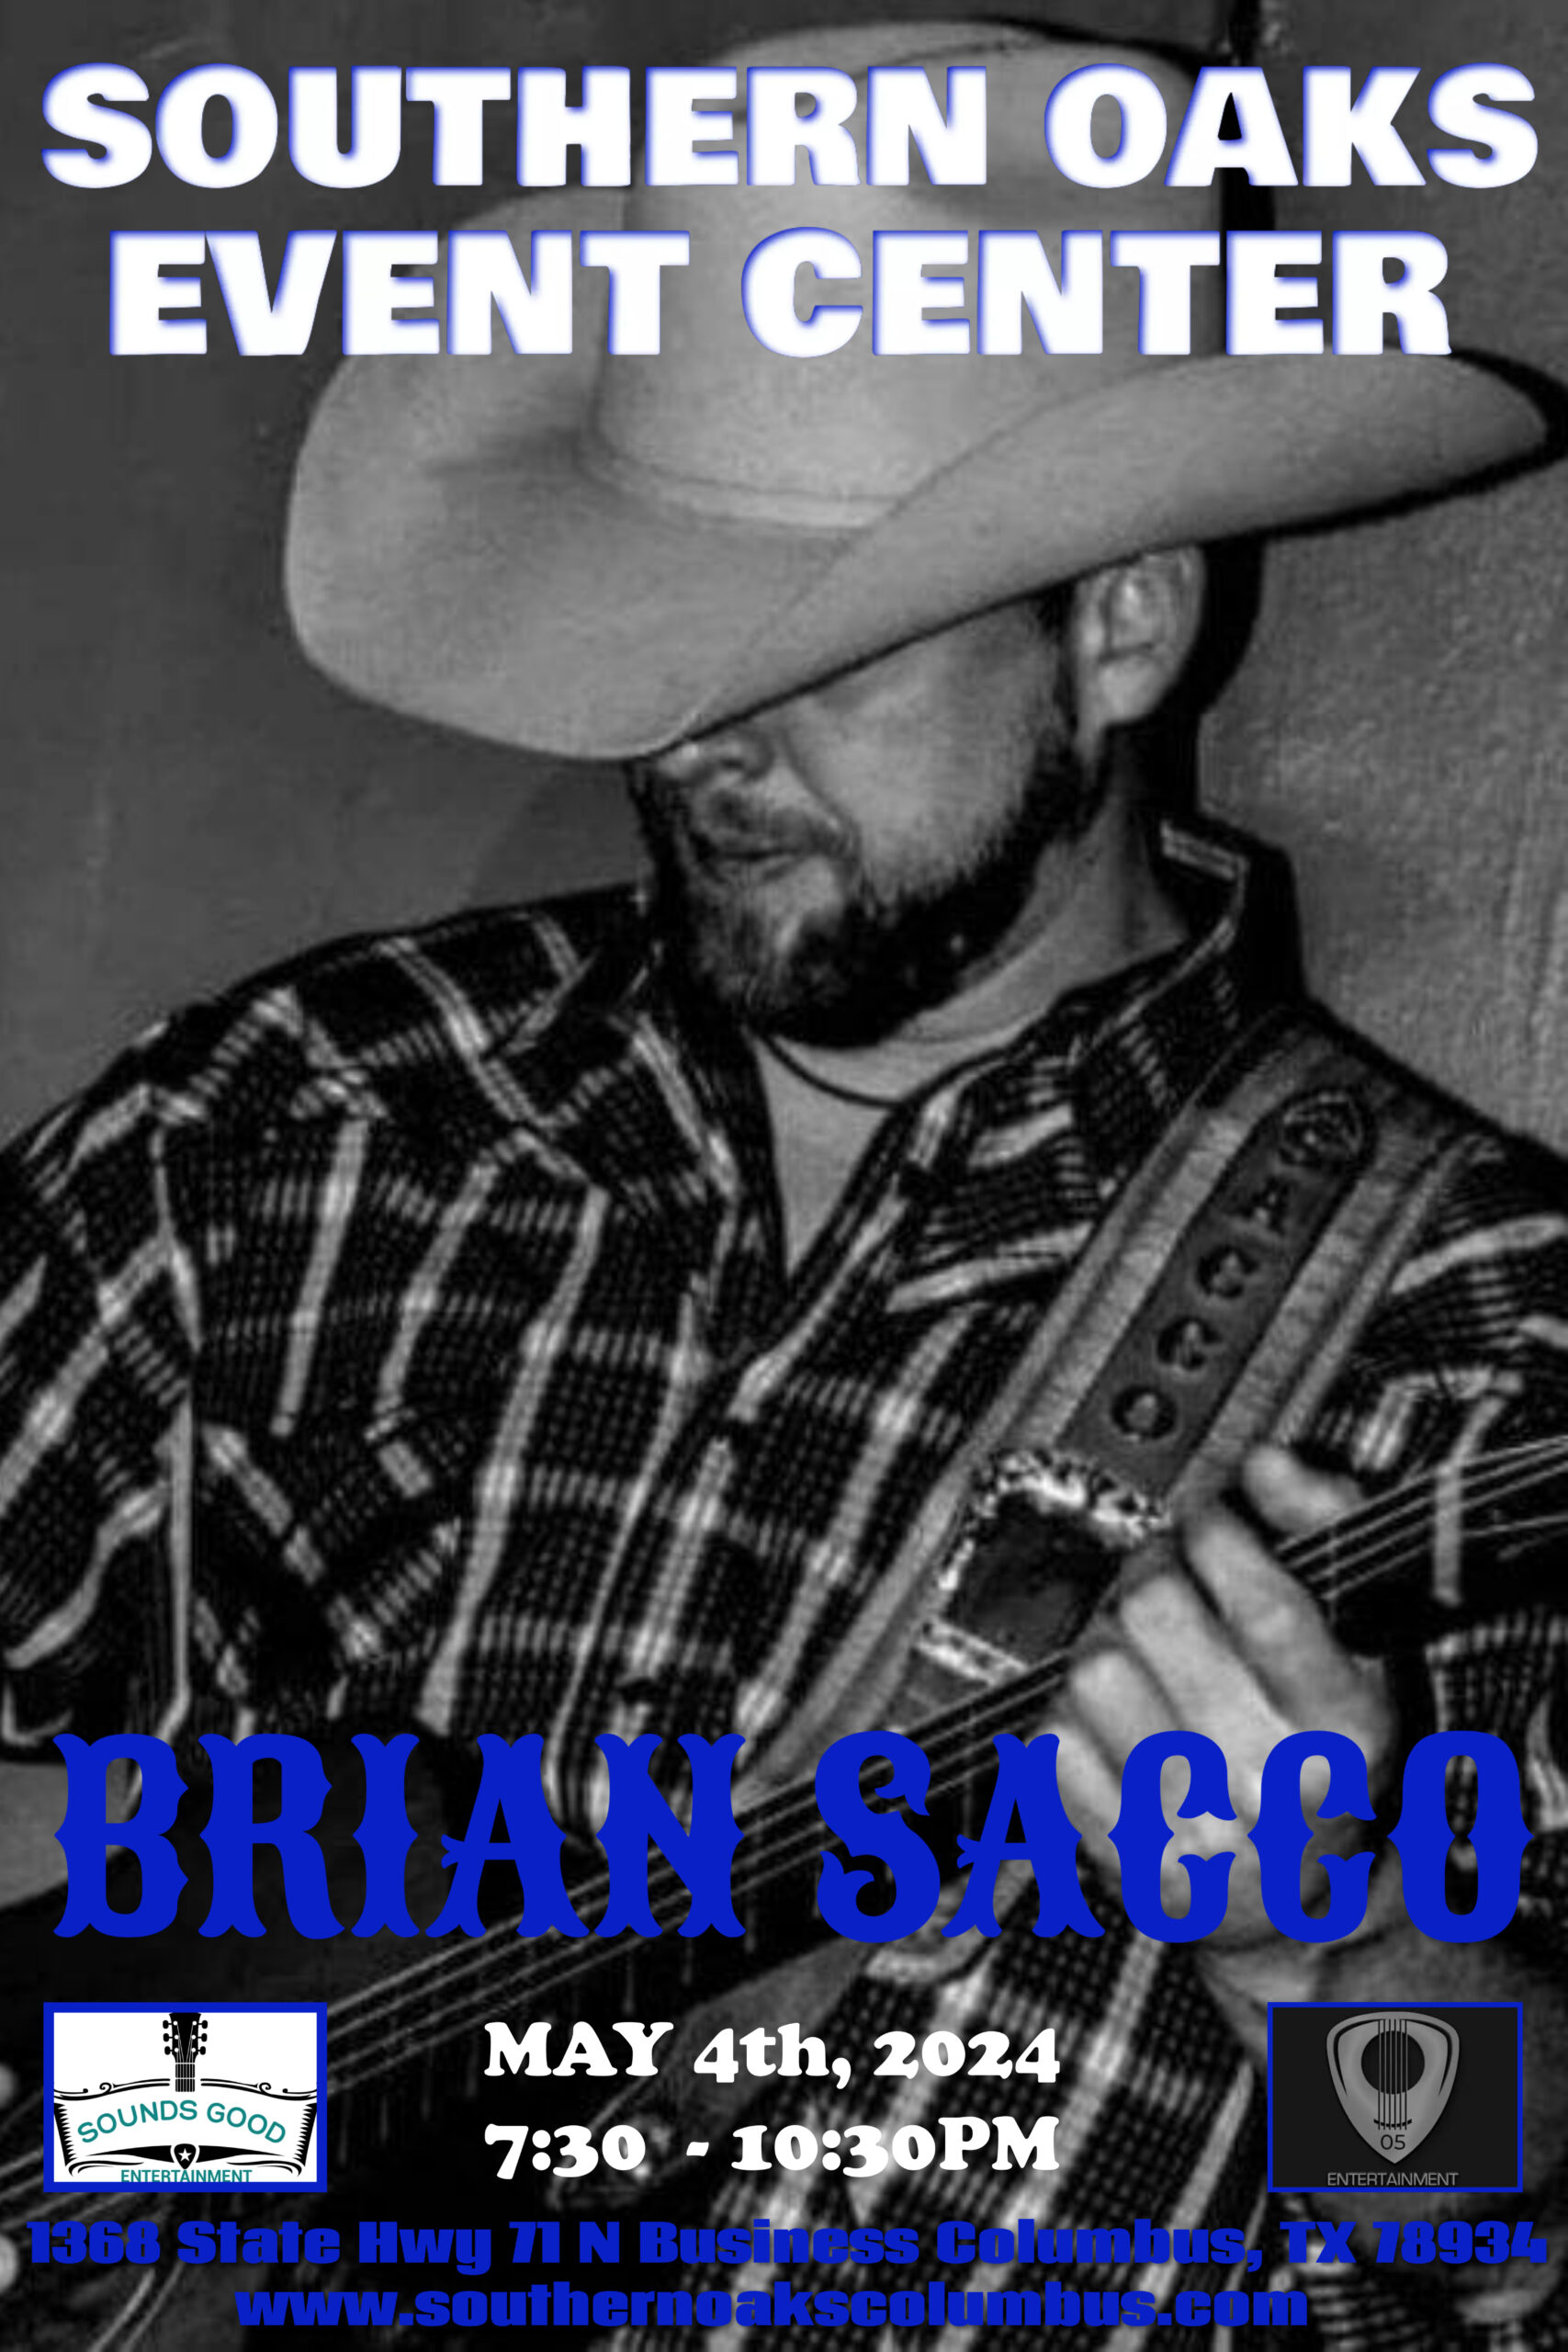 Brian Sacco @ Southern Oaks Event Center